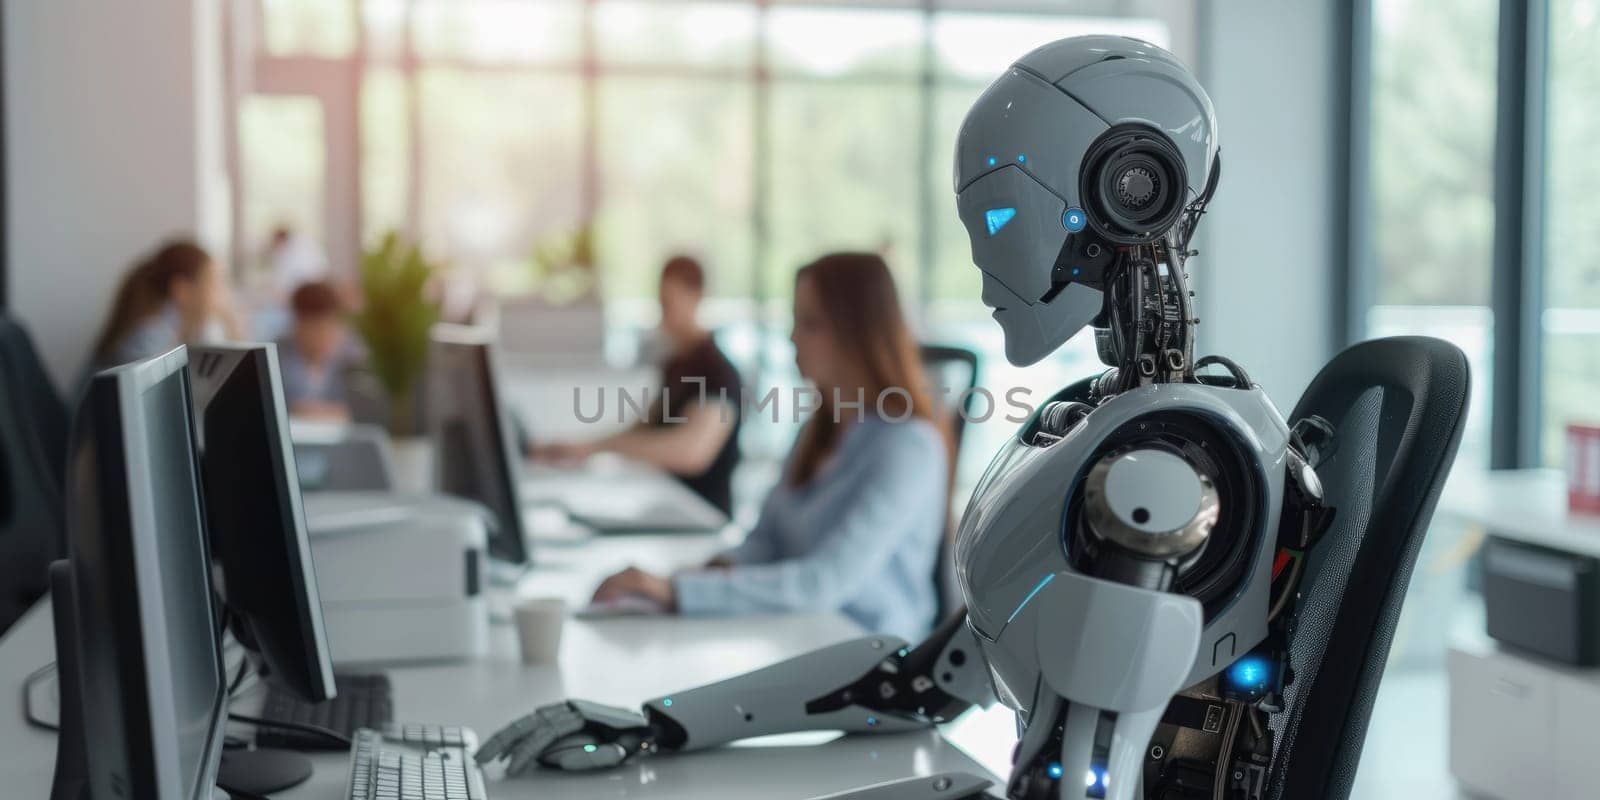 Futuristic Robot Working Alongside Humans in Office AIG41 by biancoblue